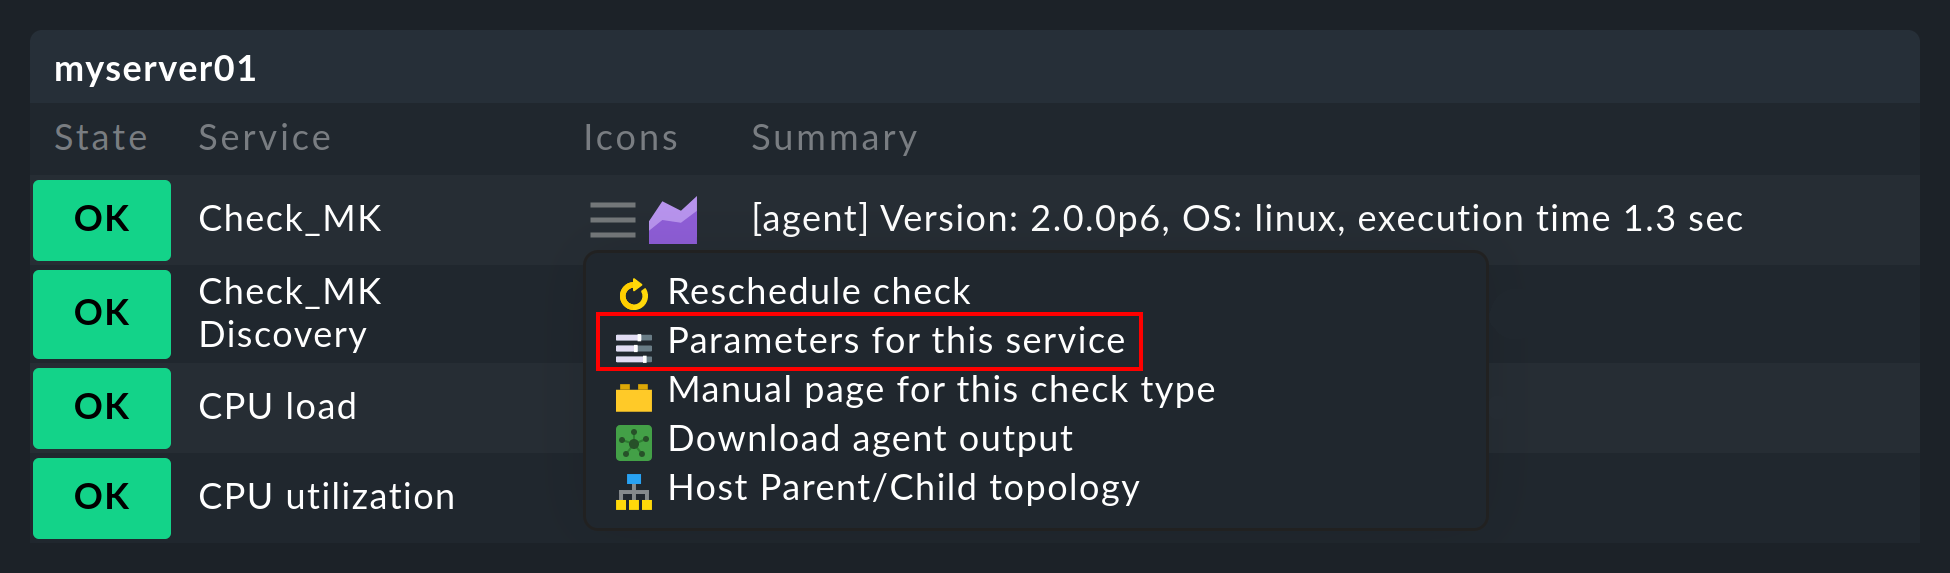 Services list in the monitoring with opened action menu of a service.